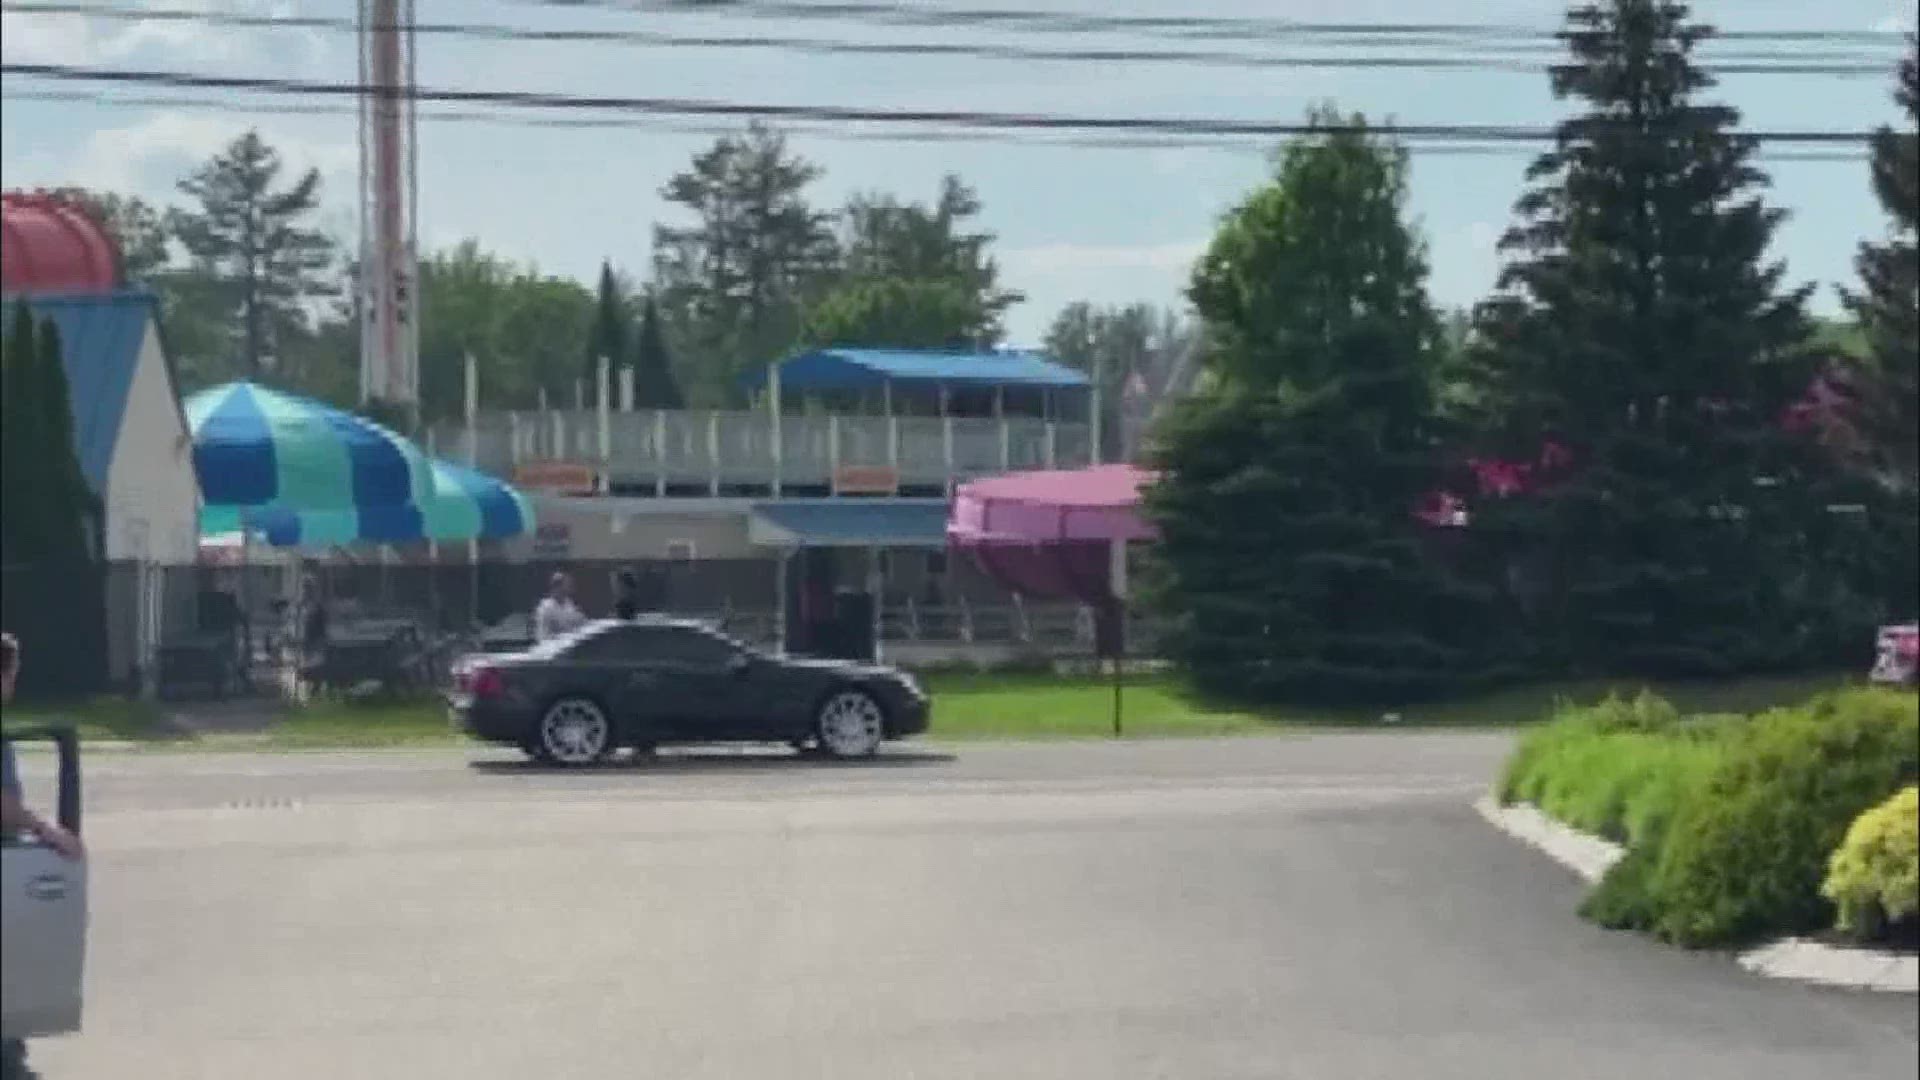 Video shows the driver of a Mercedes fighting off Jeffrey T. Lavery of New Hampshire in front of Patriot Subaru on Route 1 in Saco on Wednesday.